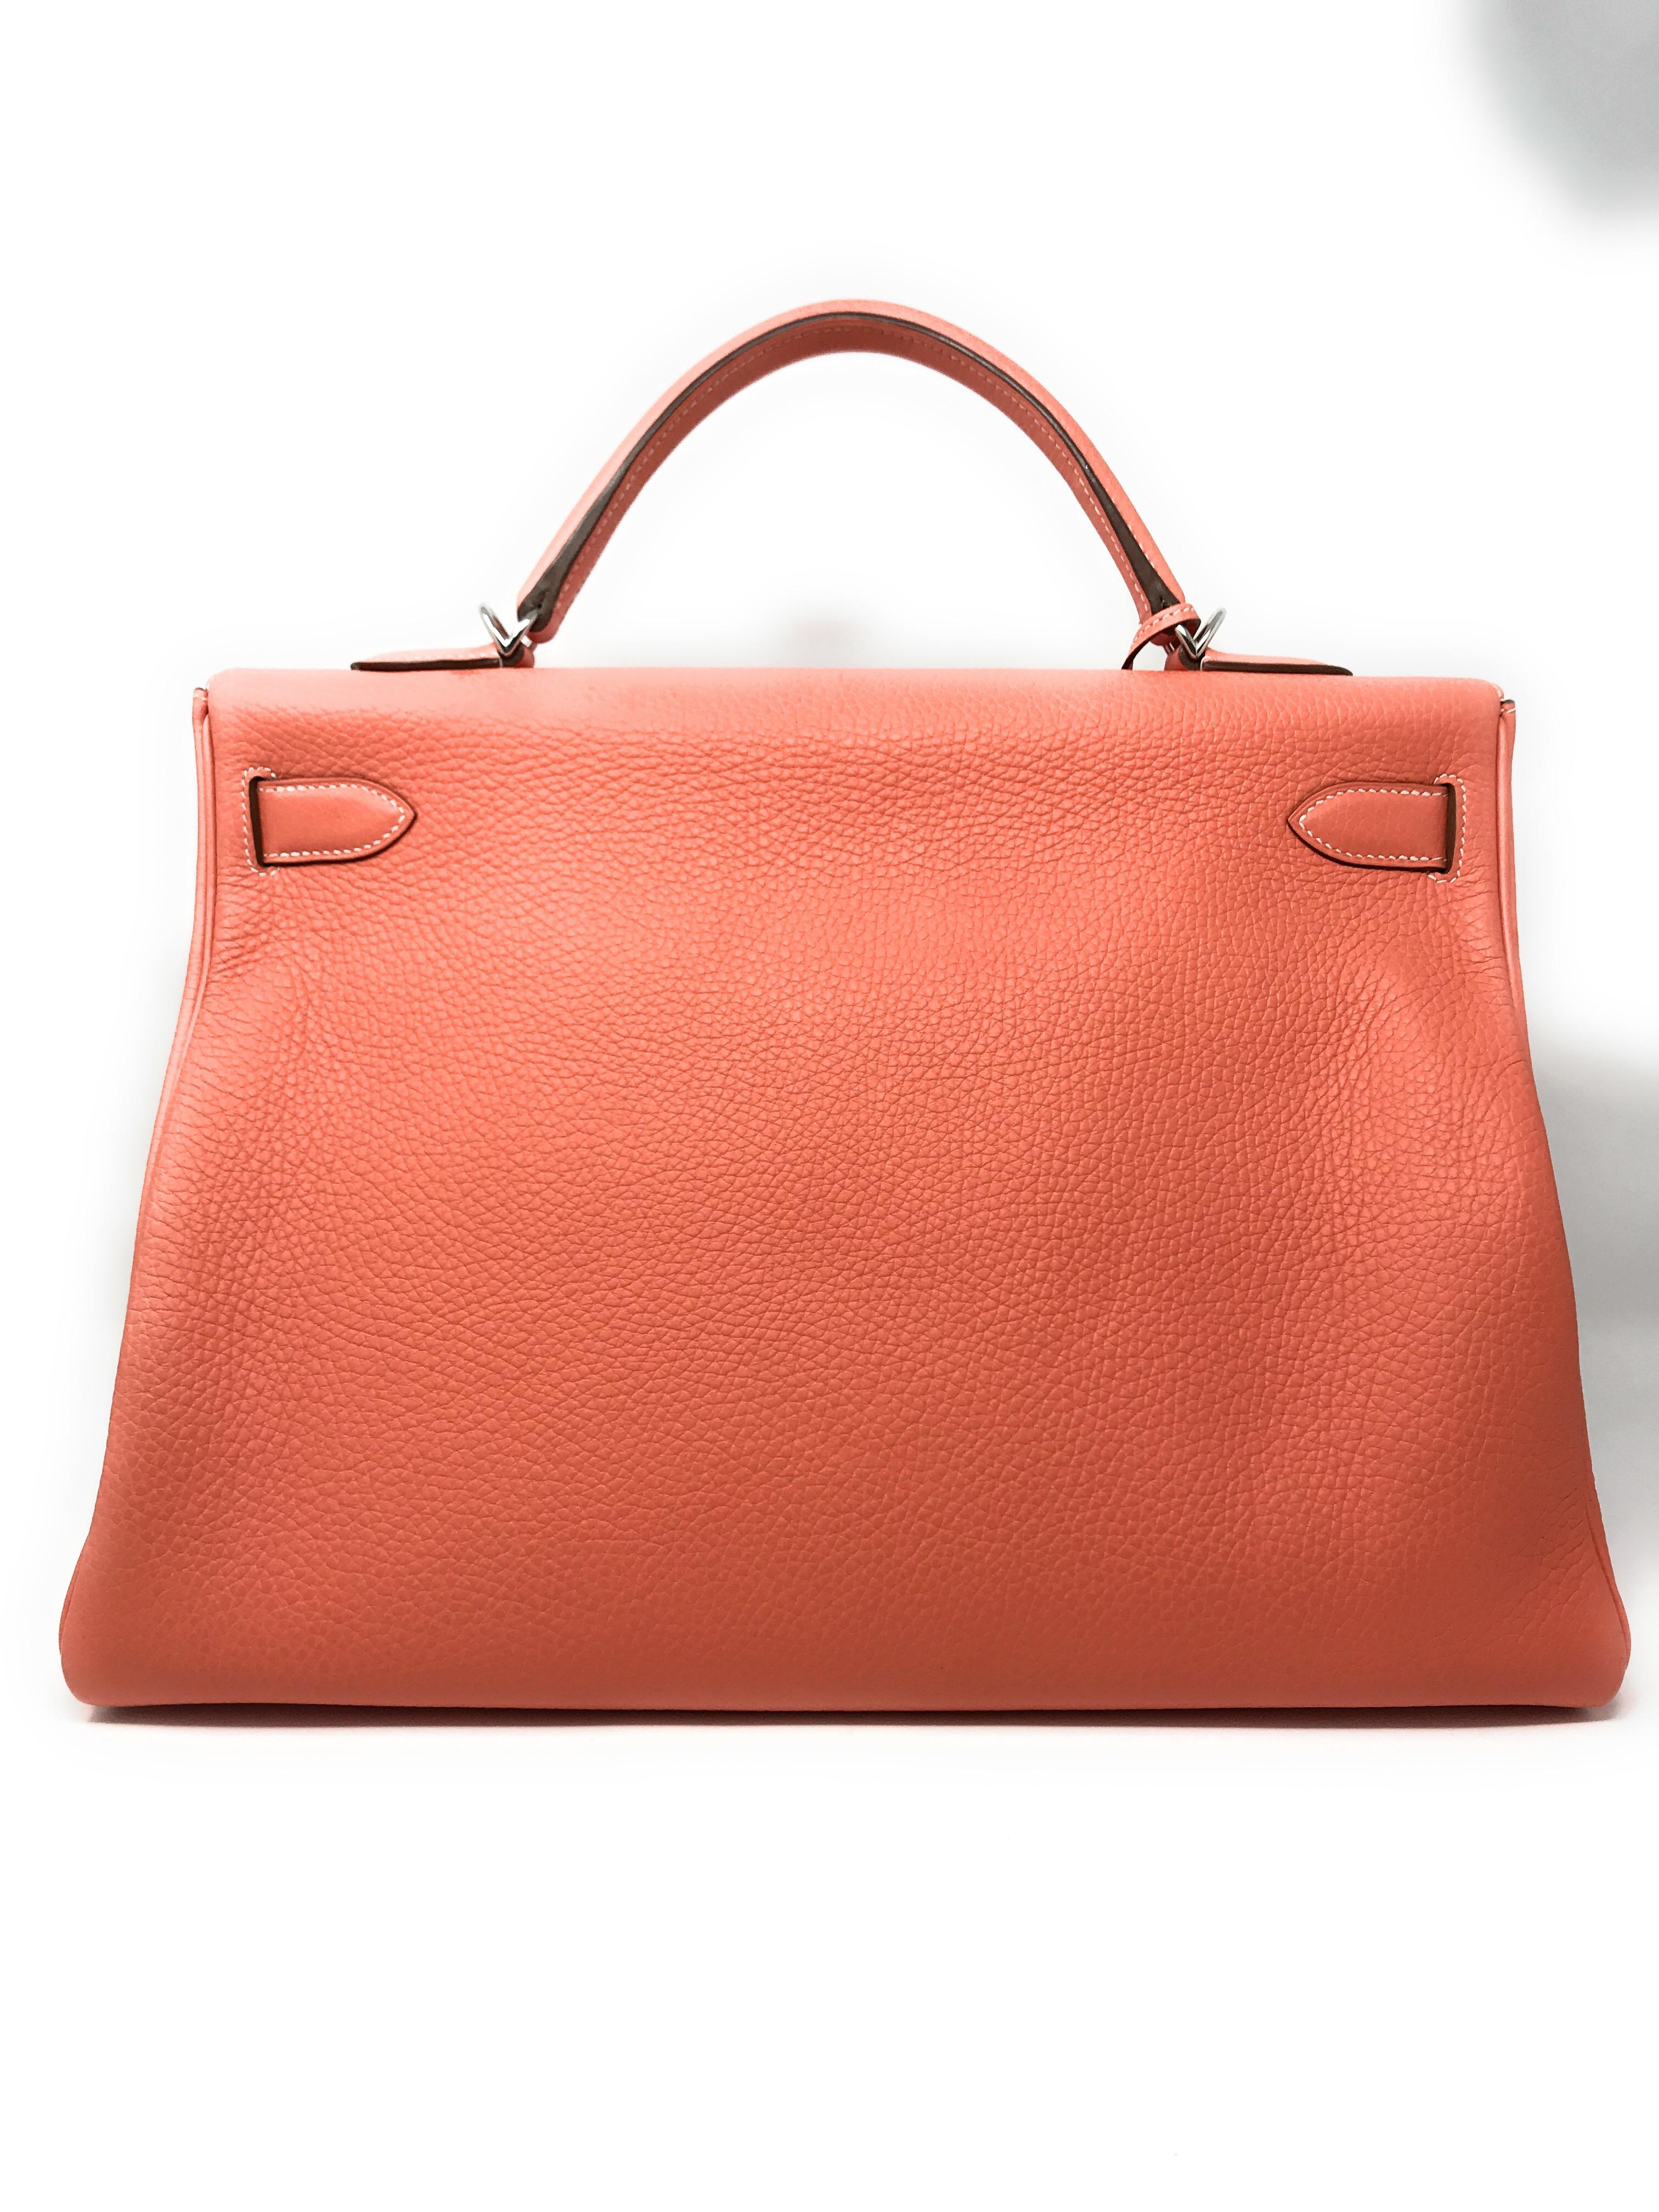 Rare Hermes Crevette is the color of this 40cm Kelly handbag. 
It is crafted in Clemence leather with a single handle, a flap closure and accented by Hermes signature Palladium hardware. The interior is lined with tonal Chevre leather, one zippered